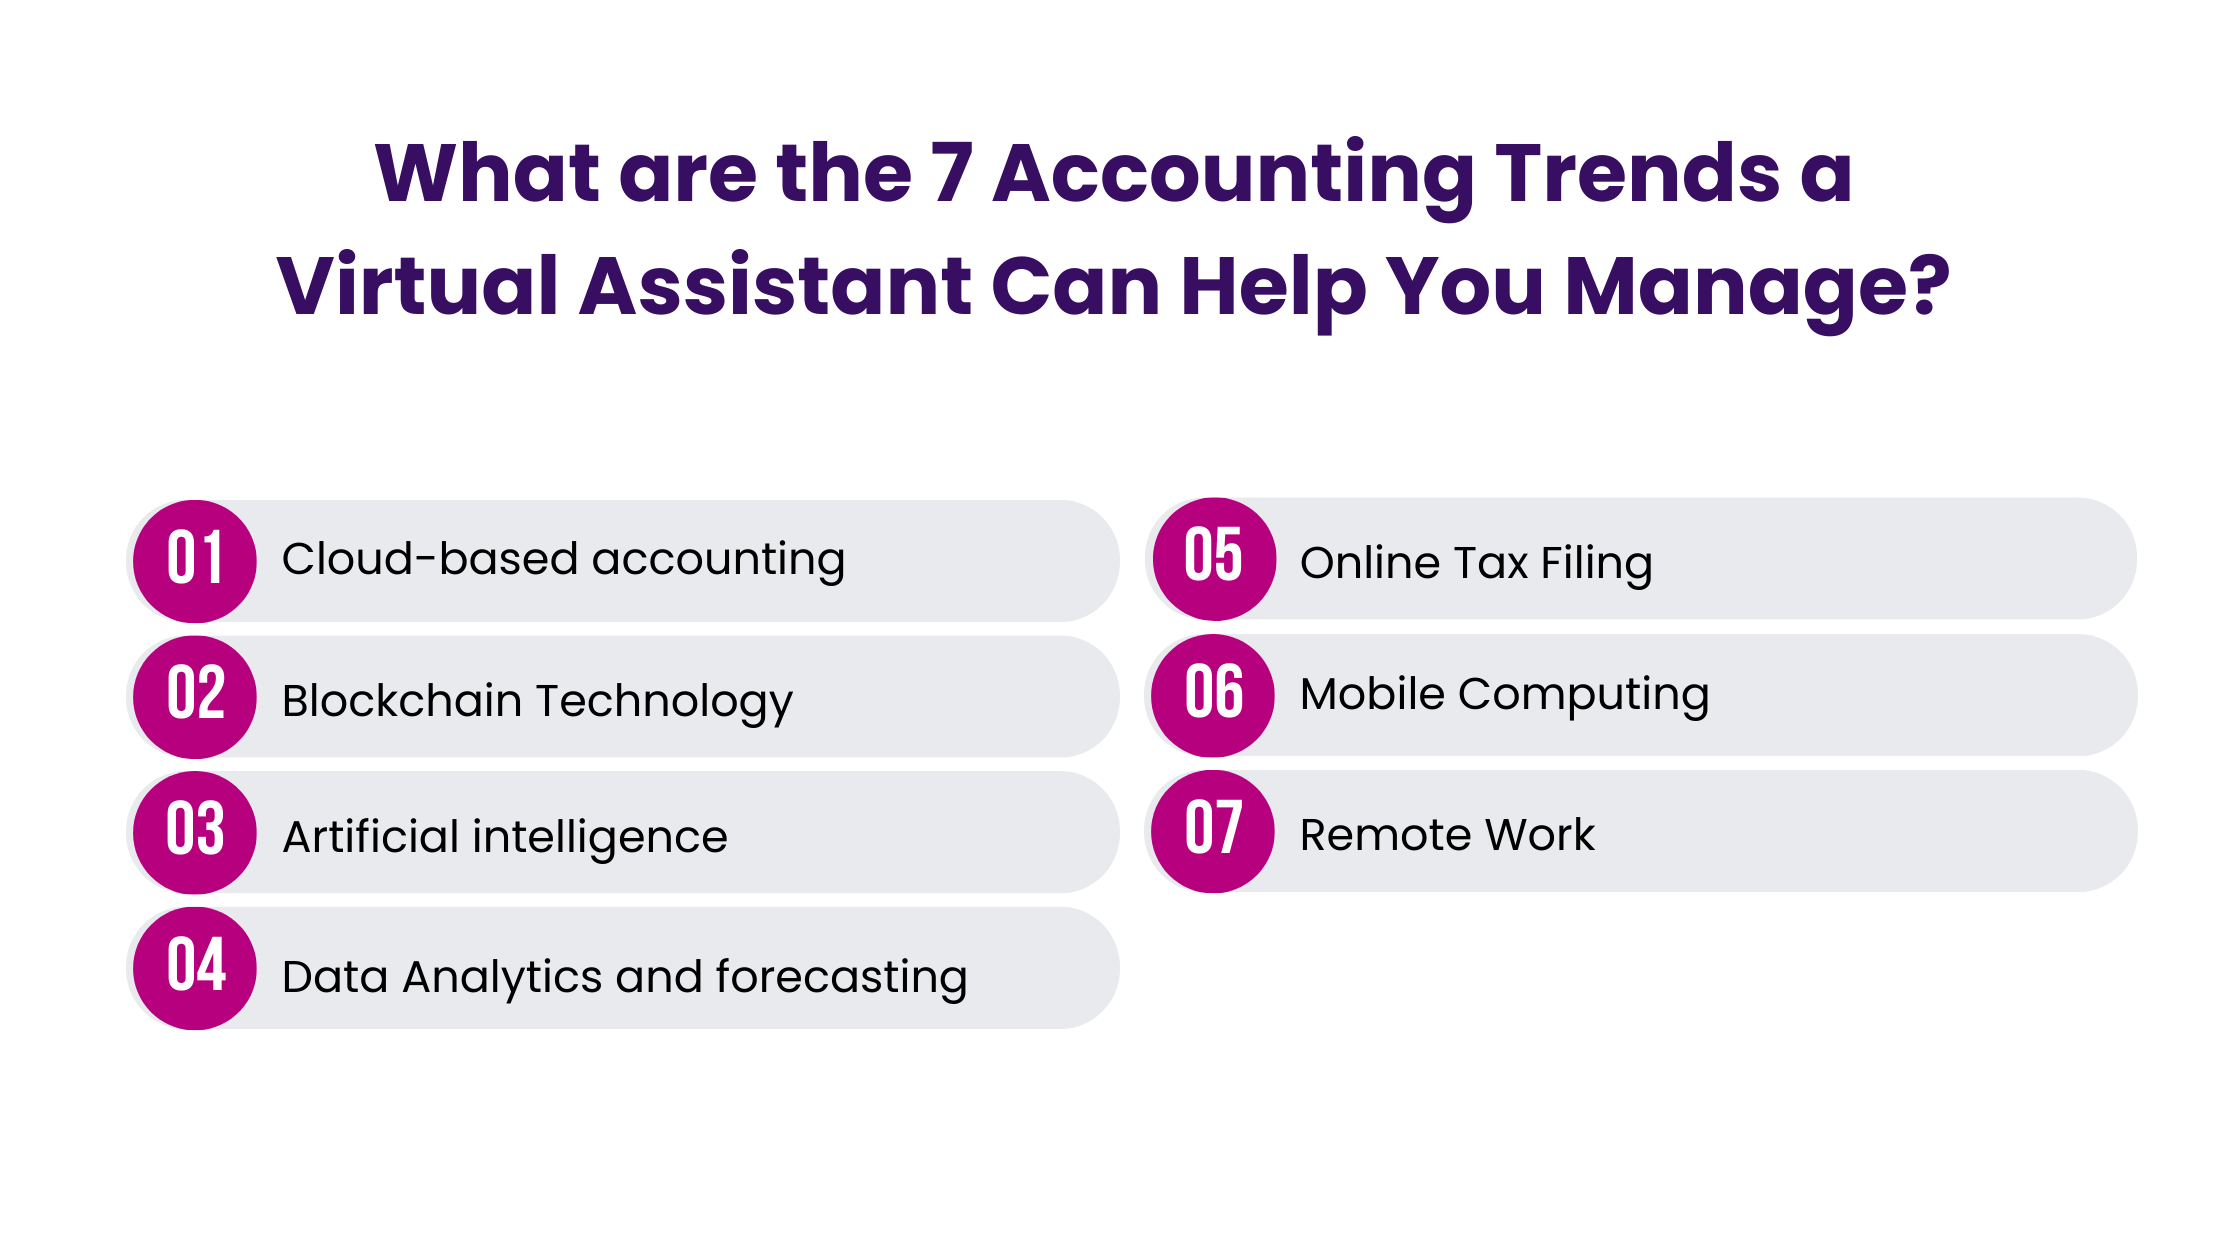 What are the 7 Accounting Trends a Virtual Assistant Can Help You Manage